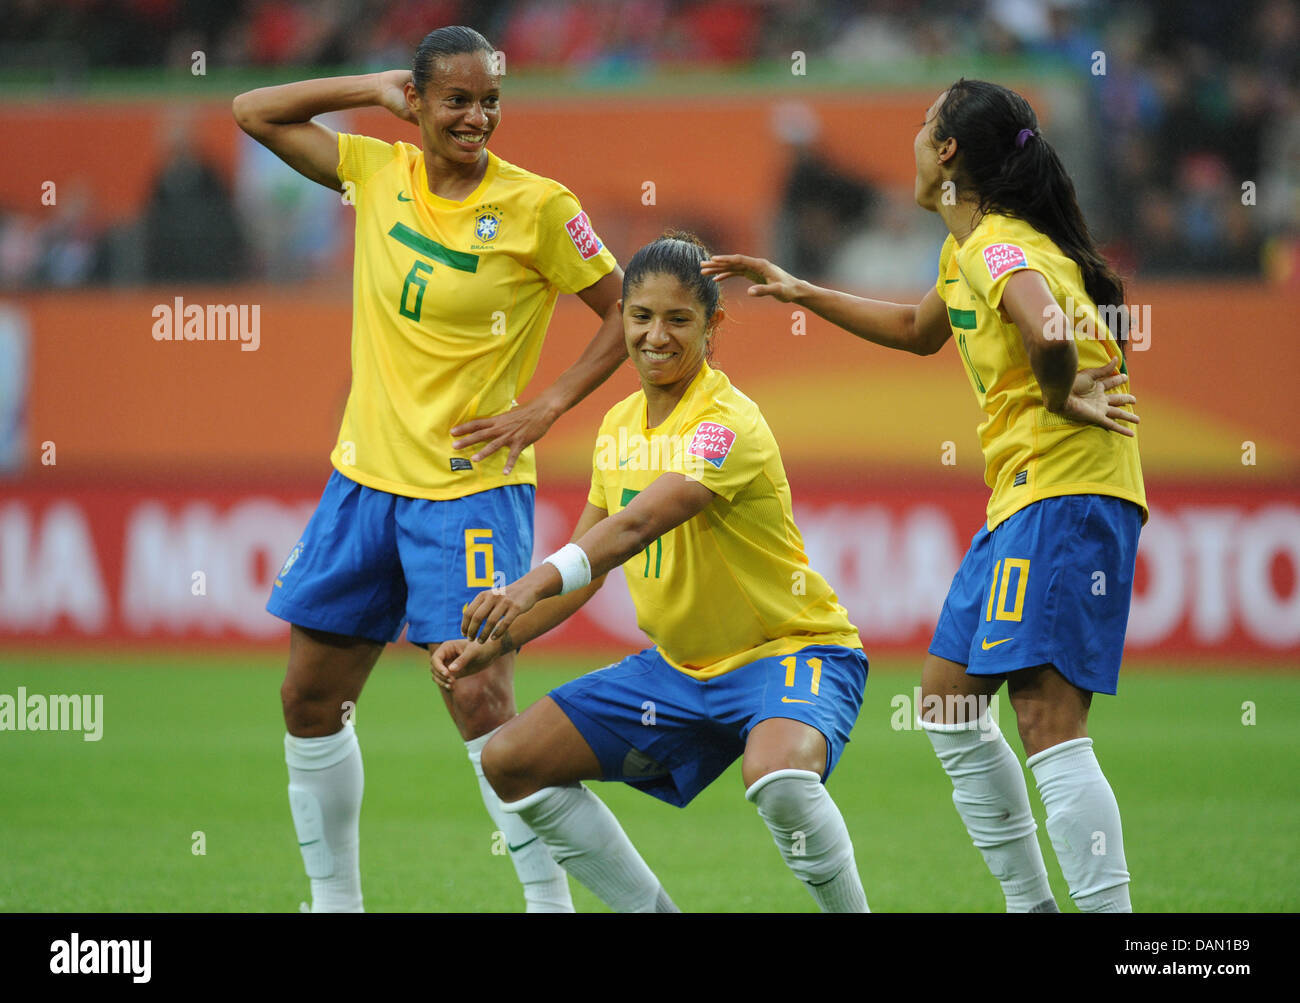 Marta (R) of Brazil celebrates with teammates Rosana (L) and Cristiane (C) after scoring 1-0  during their Group D match Brazil against Norway of FIFA Women's World Cup soccer tournament at the Arena Im Allerpark, Wolfsburg, Germany, 03 July 2011. Foto: Peter Steffen dpa/lni  +++(c) dpa - Bildfunk+++ Stock Photo